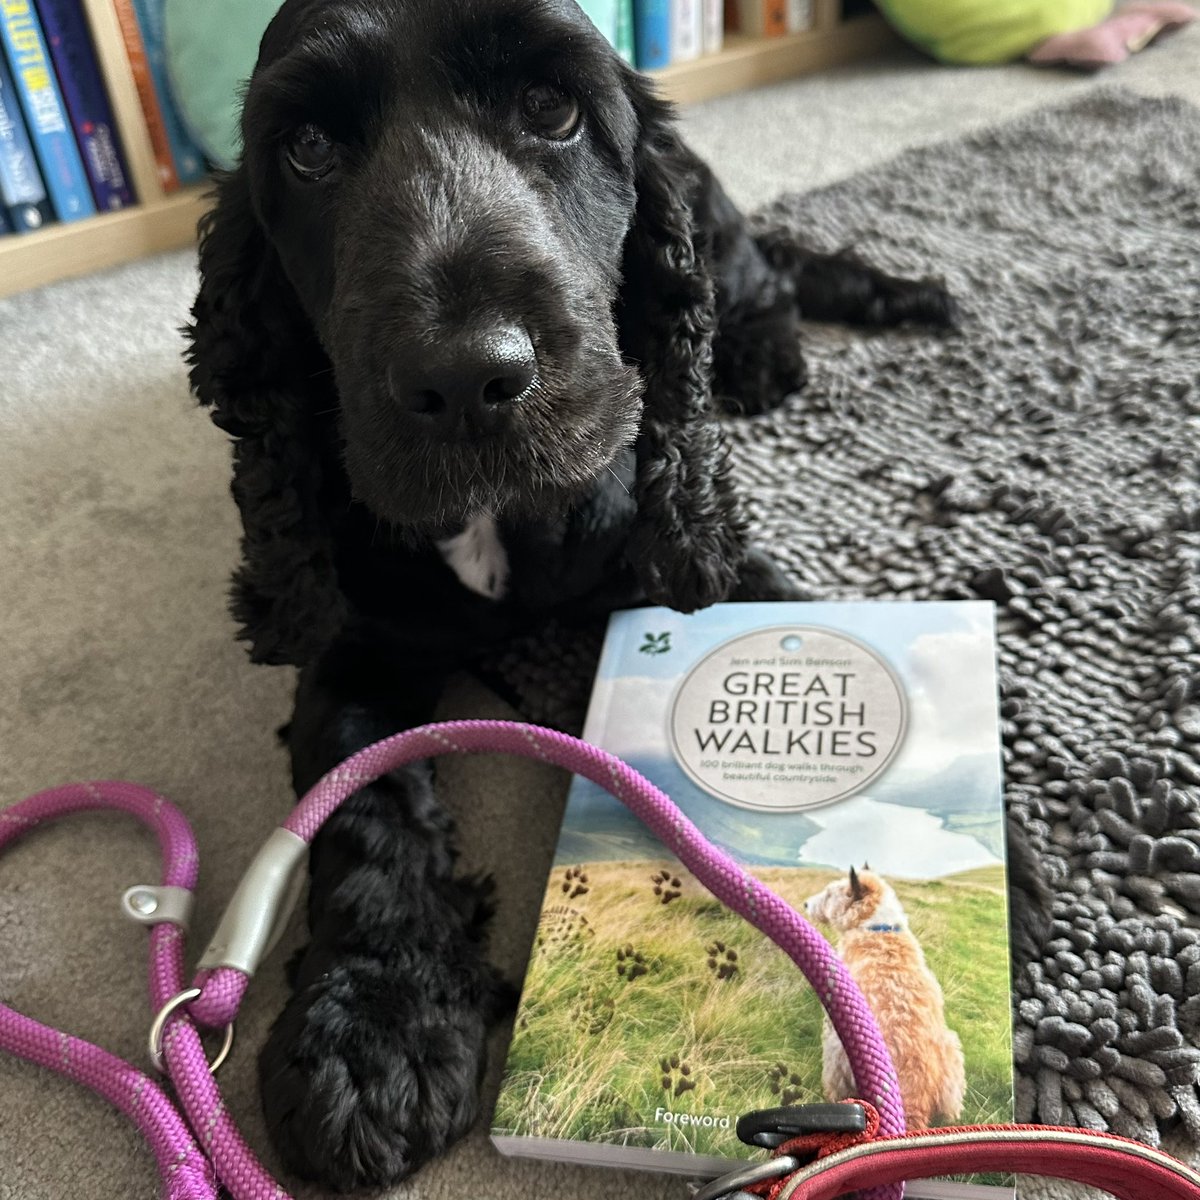 📚 #PublicationDay 📚 Today sees the release of #GreatBritishWalkies by @Collins_Ref @NTBooks & @Forthglade This great book details all the best dog friendly walks all across the UK, Willow and I can’t wait to go out and explore!🐾🐕‍🦺🐶 #BookTwitter #Bookblogger @RachelMayQuin